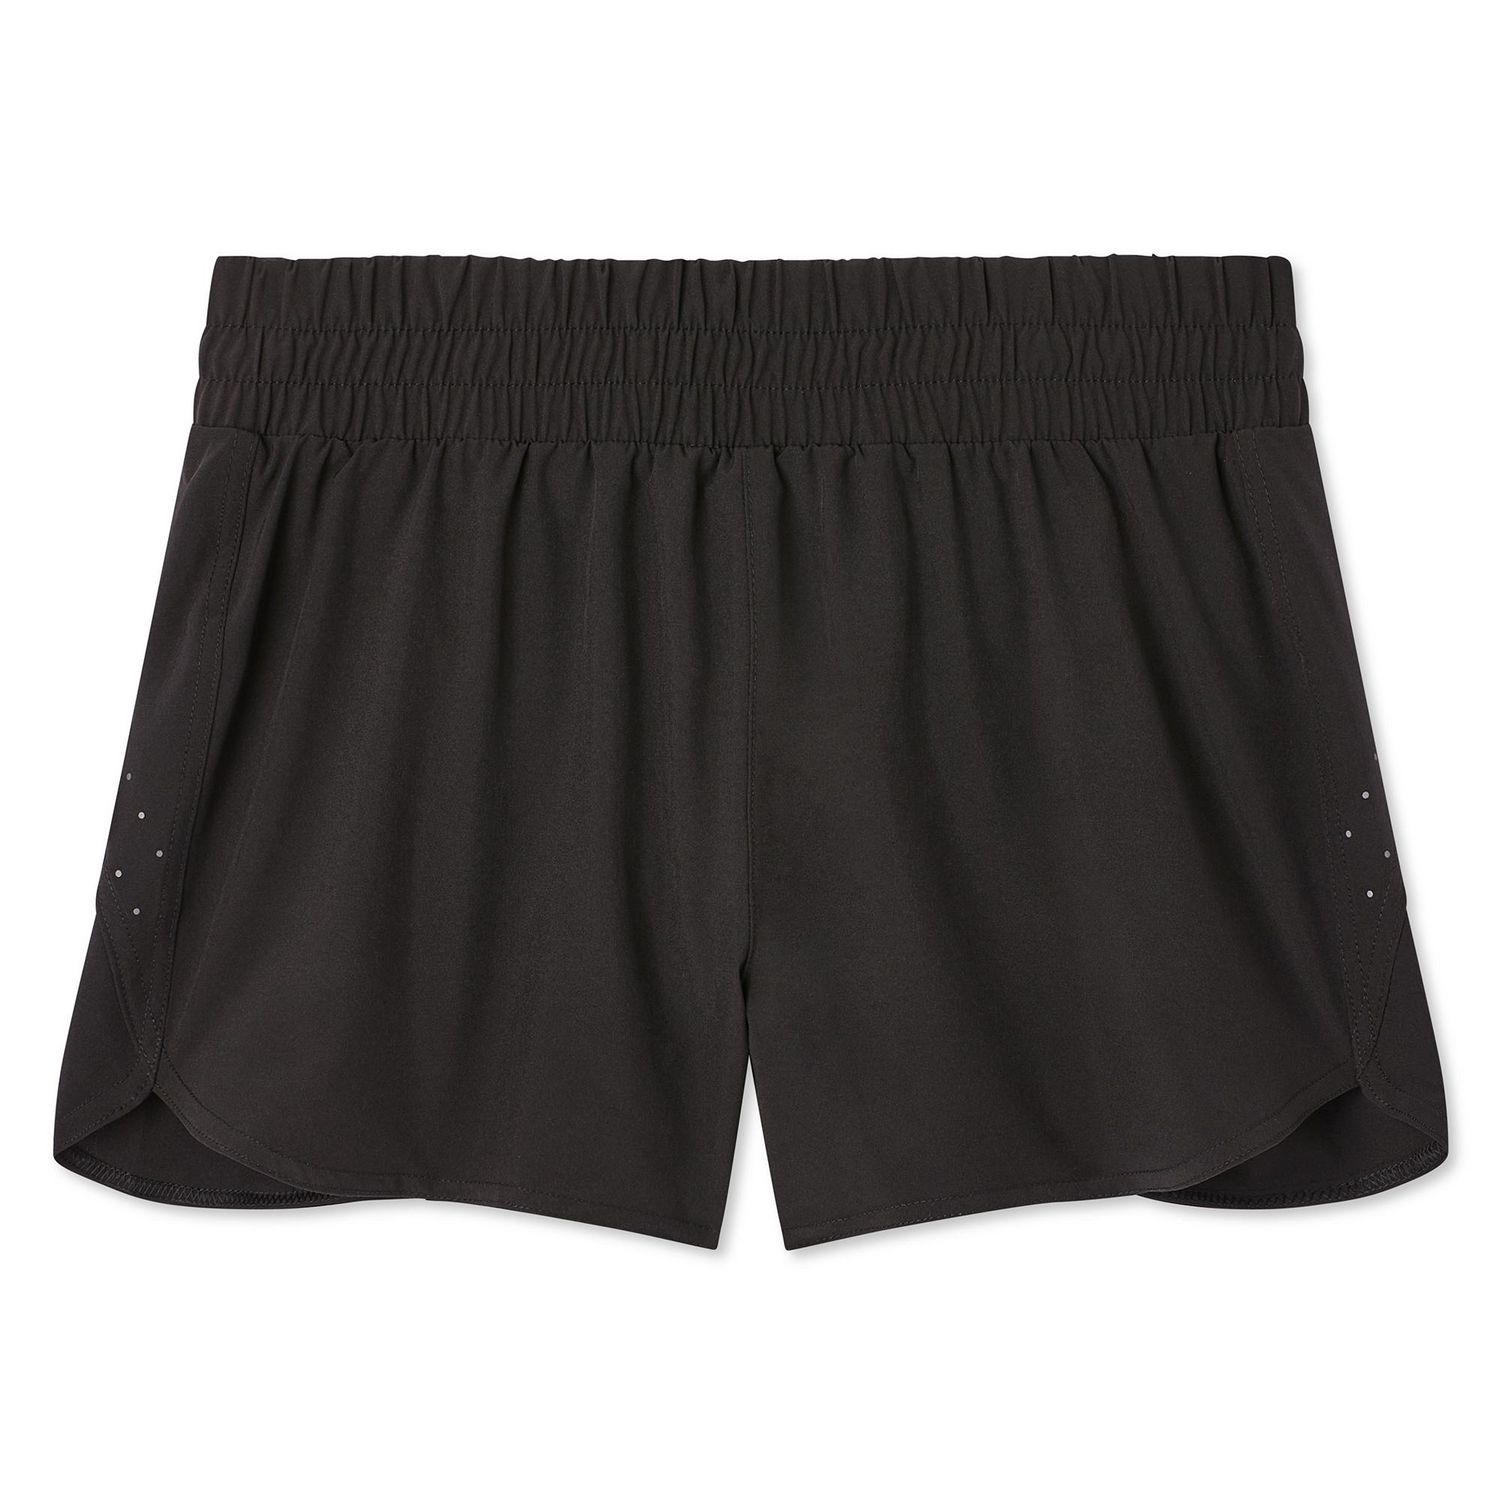 Tuff Athletics Black Elastic Waist Shorts Size Small - $12 New With Tags -  From Hi